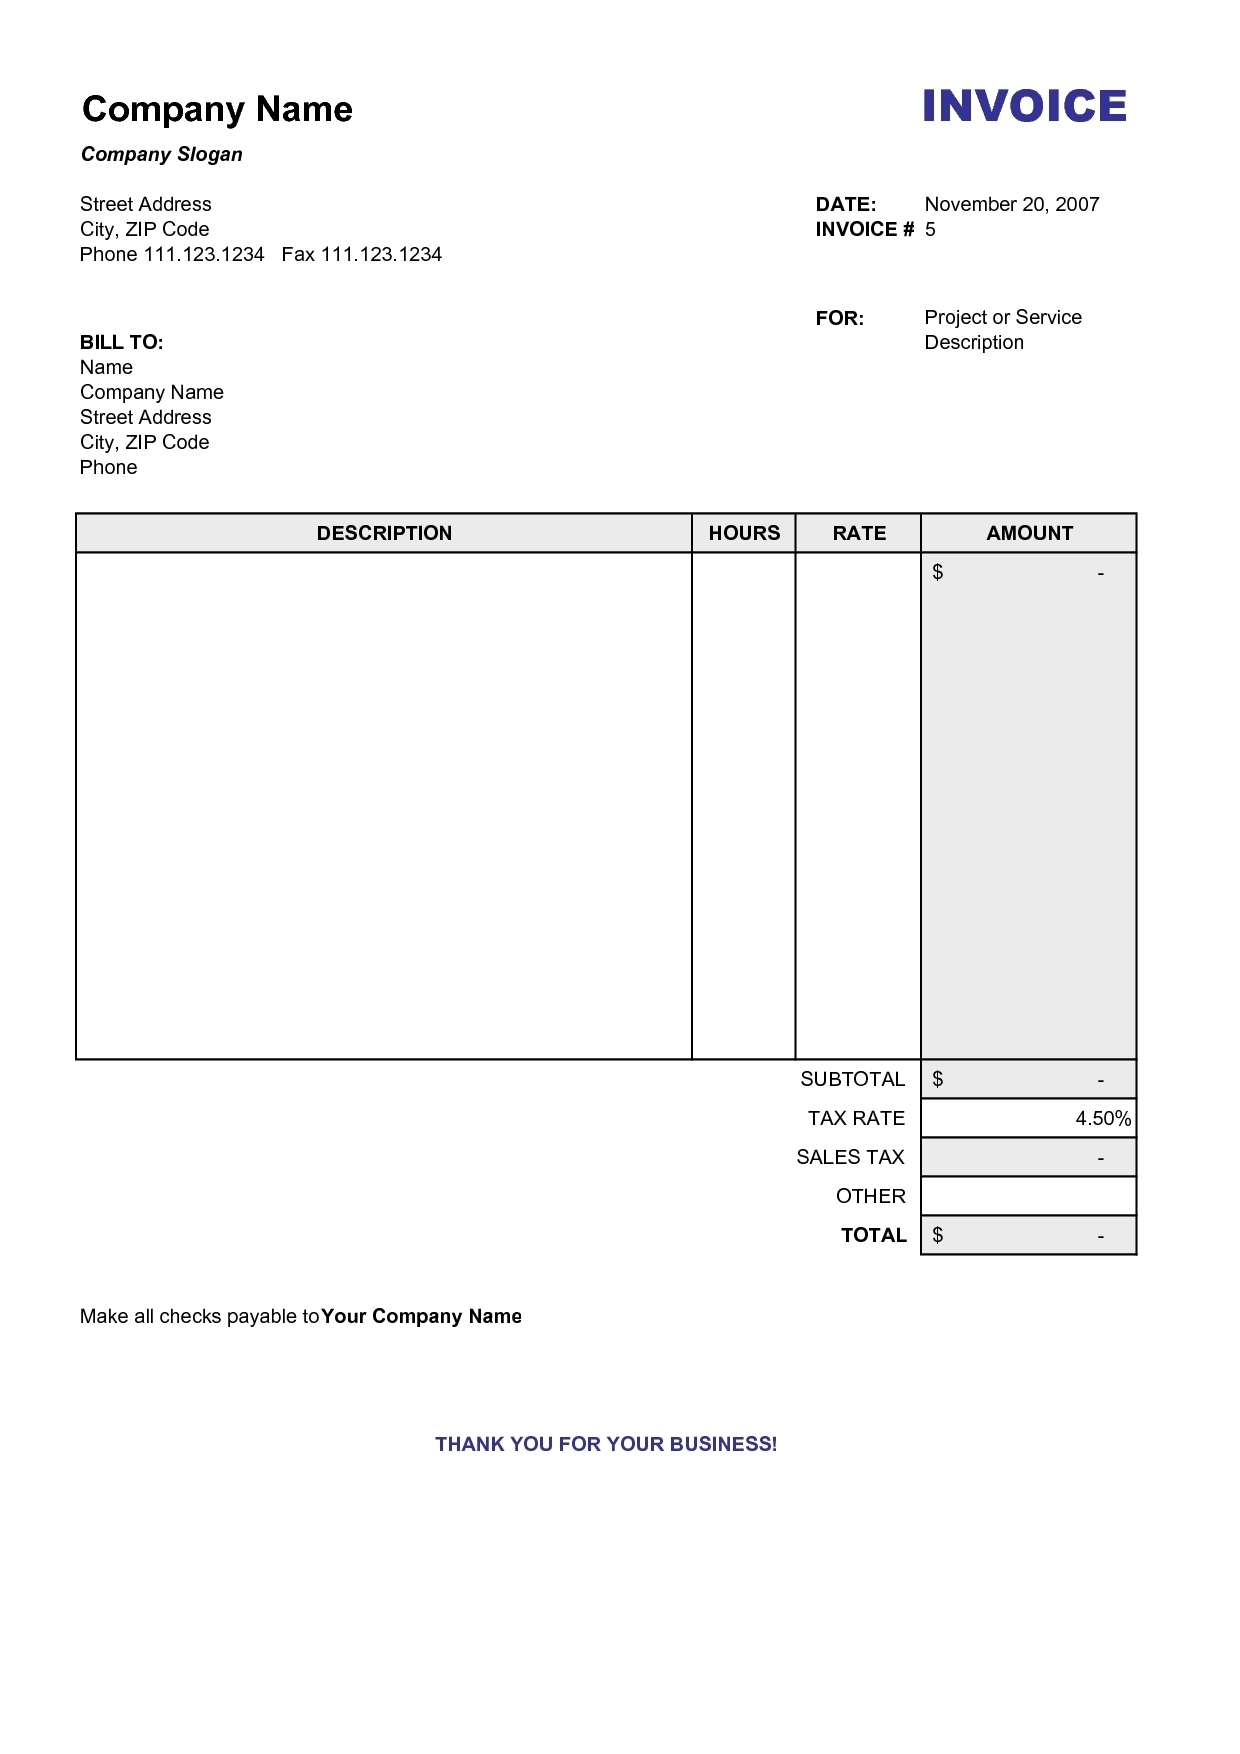 copy of a blank invoice invoice template free 2016 copy of blank copy of invoices